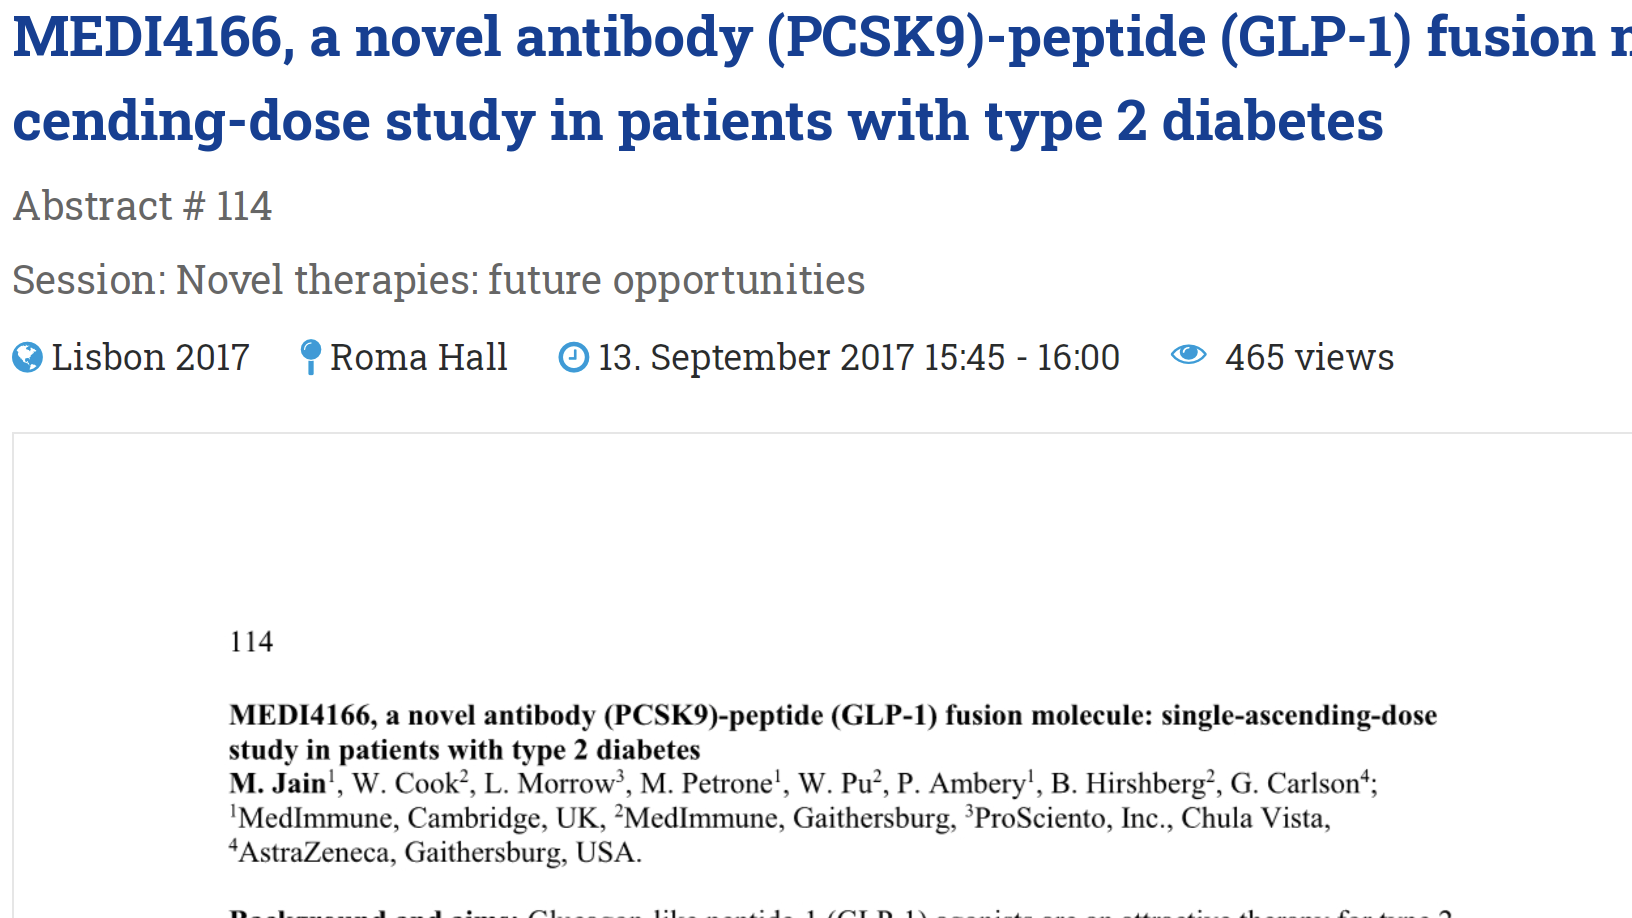 MEDI4166, a novel antibody (PCSK9)-peptide (GLP-1) fusion molecule: single-ascending-dose study in patients with type 2 diabetes thumbnail